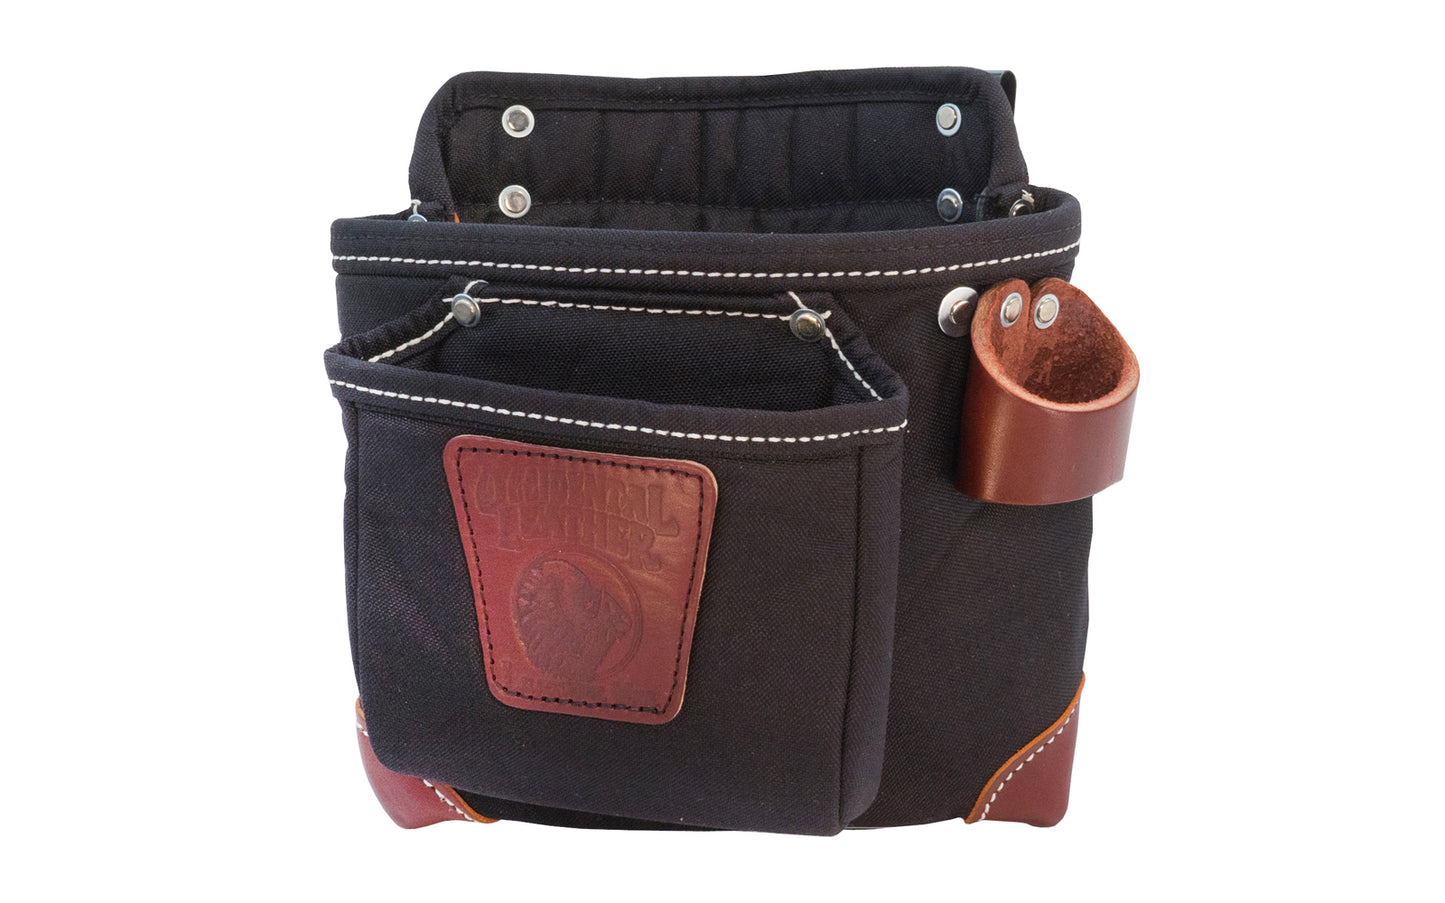 Occidental Leather Builders' Vest Clip On Tool Bag ~ Model 8517 - Occidental Leather clip-on tool bag features holders for pencils, work knife, chisel, level, lumber crayon, plus a heavy duty hammer loop. Designed to fit the Builders' Vest No. 2535. Made of industrial nylon material & genuine leather. 